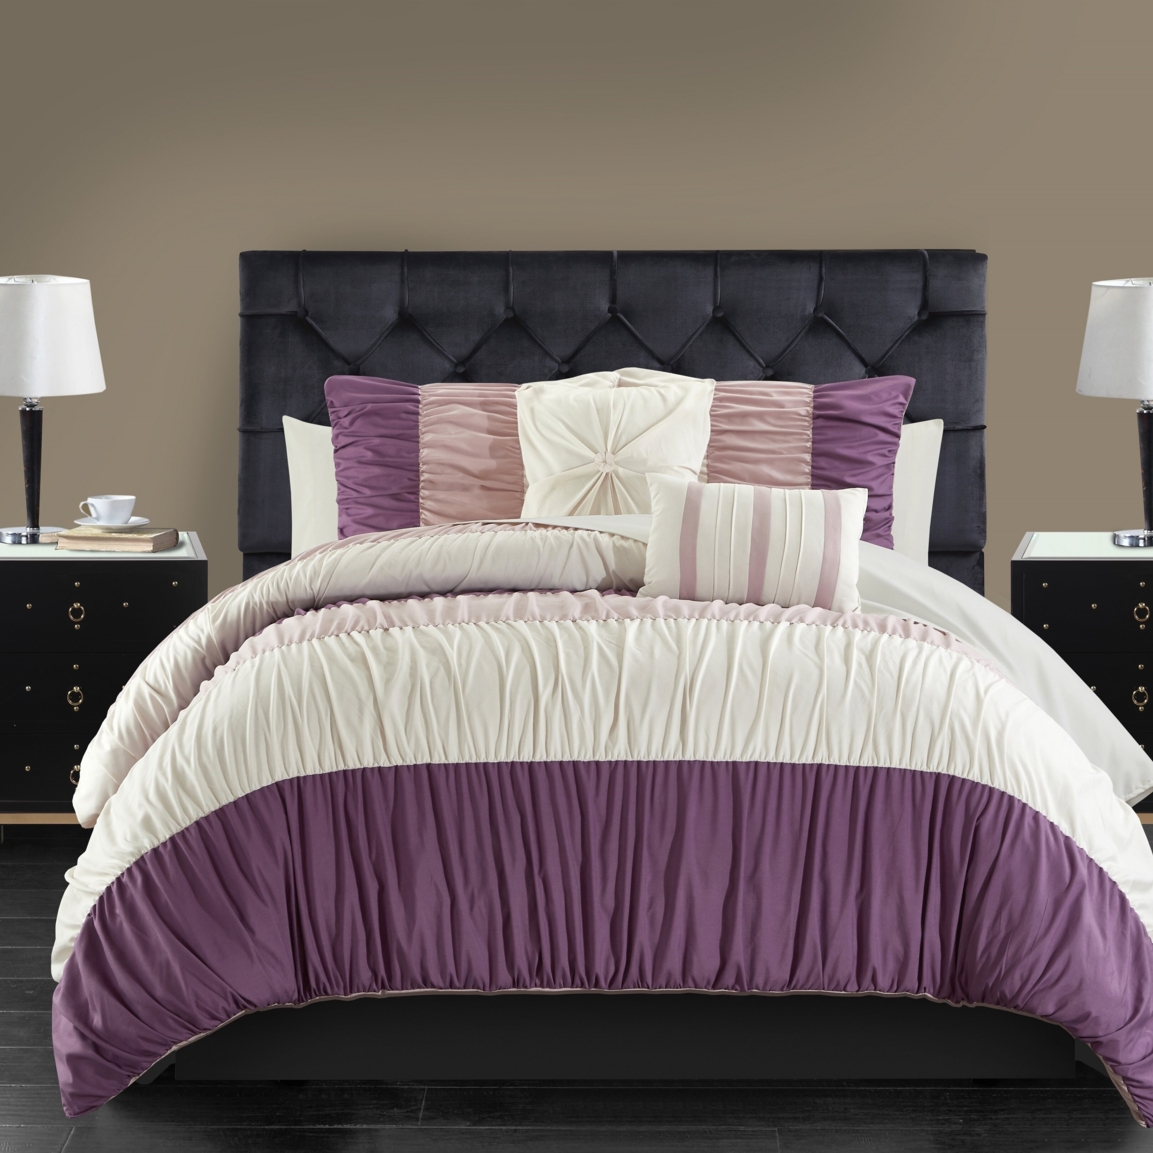 Faye 9 Or 7 Piece Comforter Ruched Color Block Bed In A Bag - Purple, Twin - 7 Piece